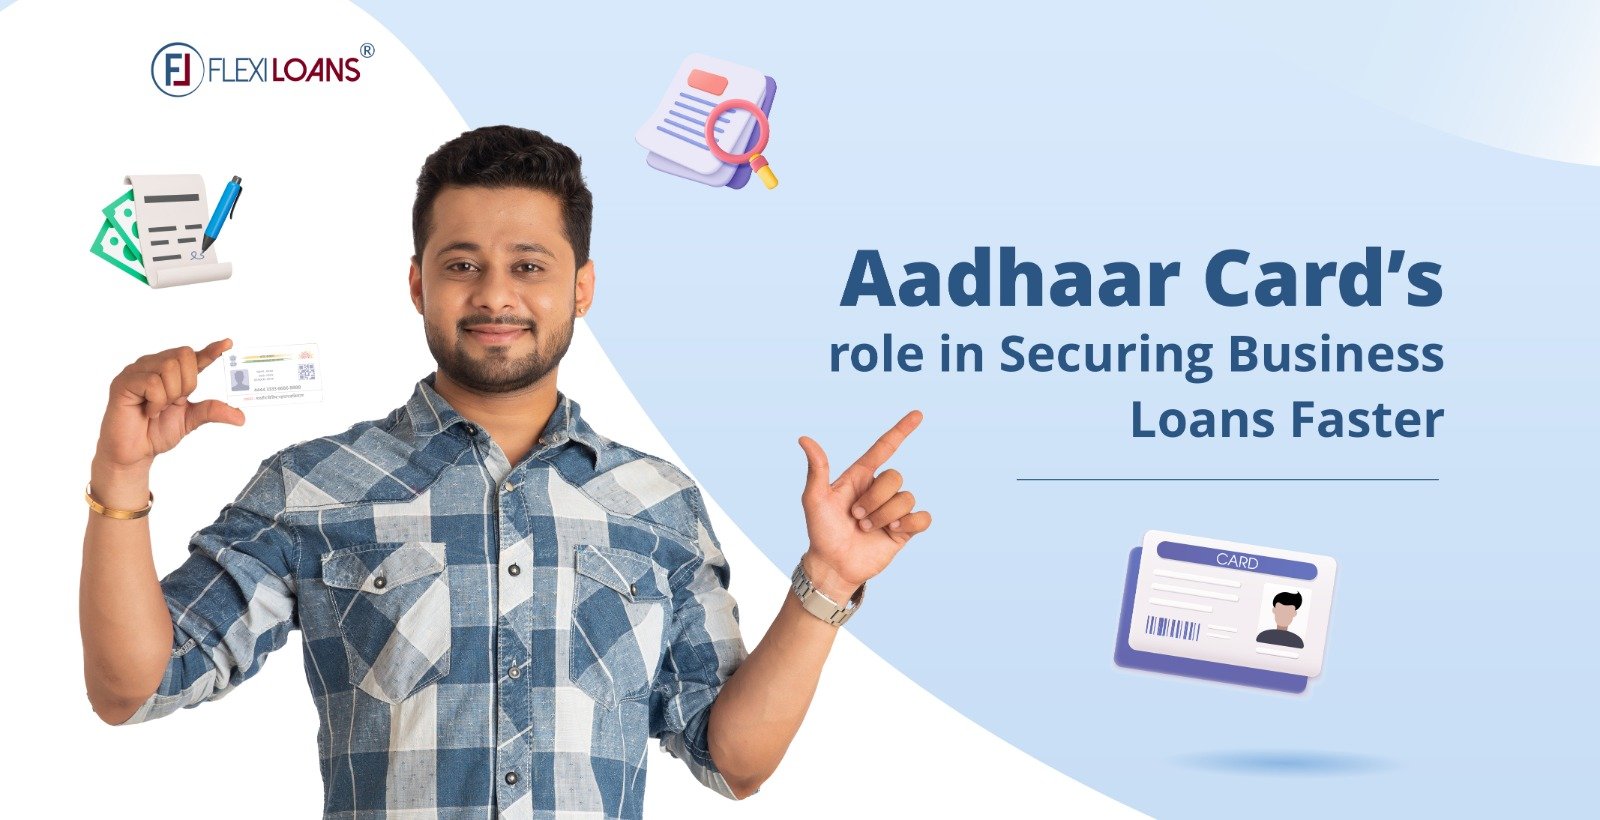 Aadhaar Card’s Role in Securing Business Loans Faster